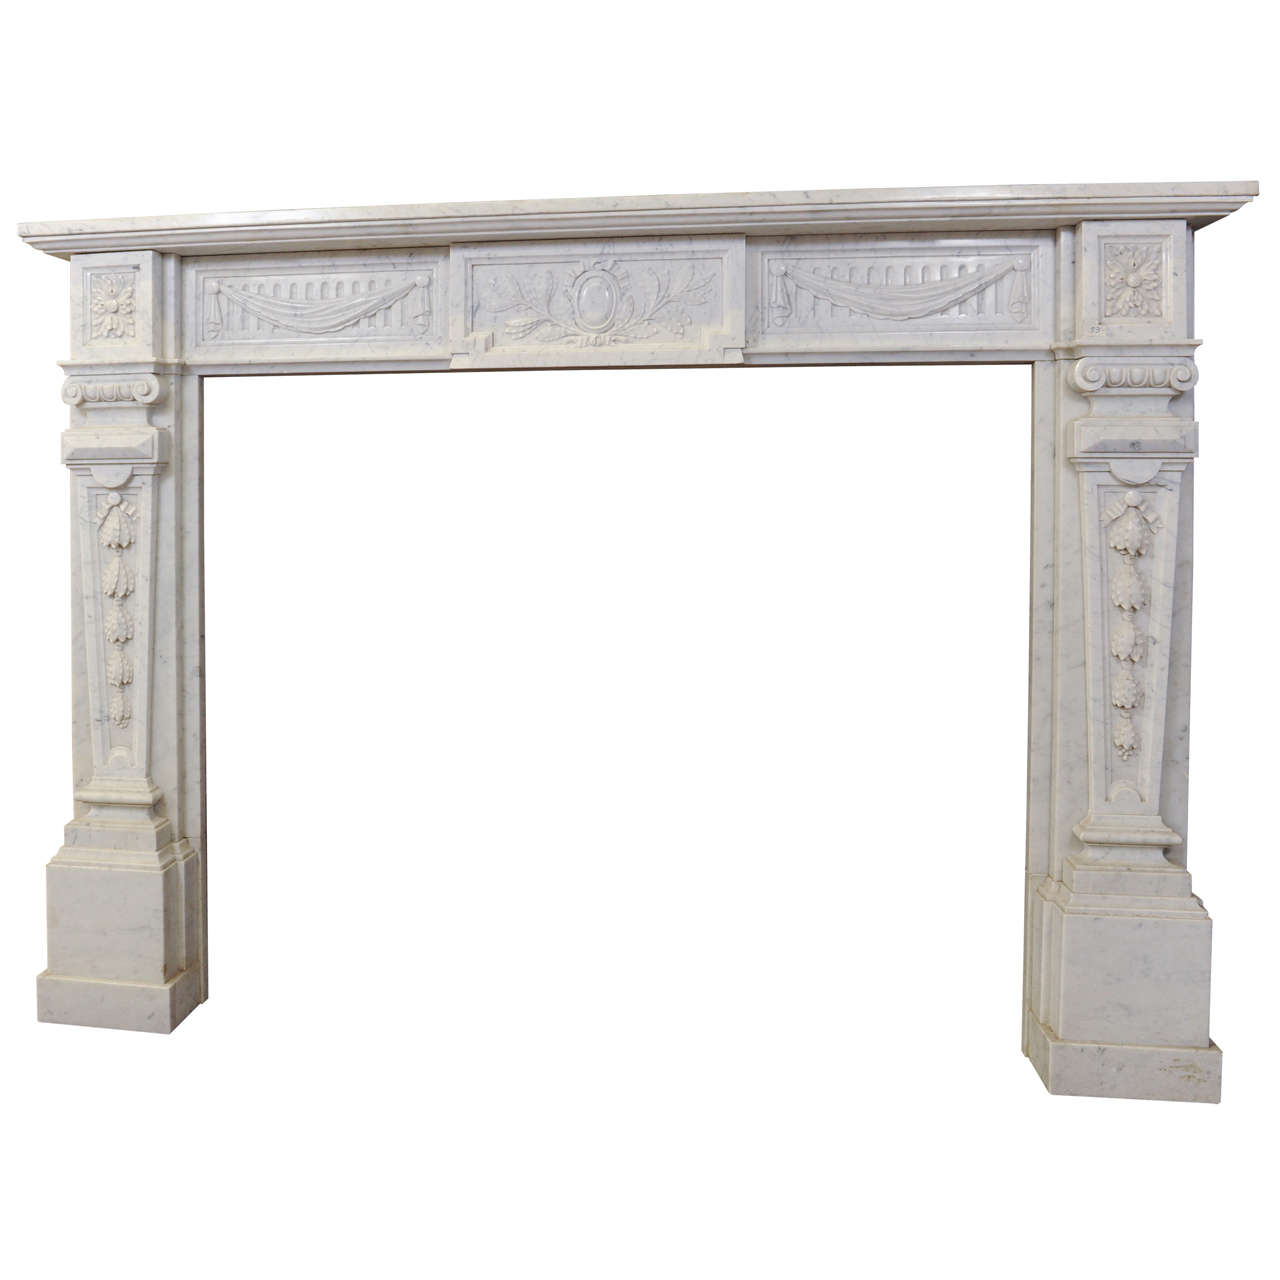 A 19th century French Neoclassical Carrara marble fireplace / mantle piece